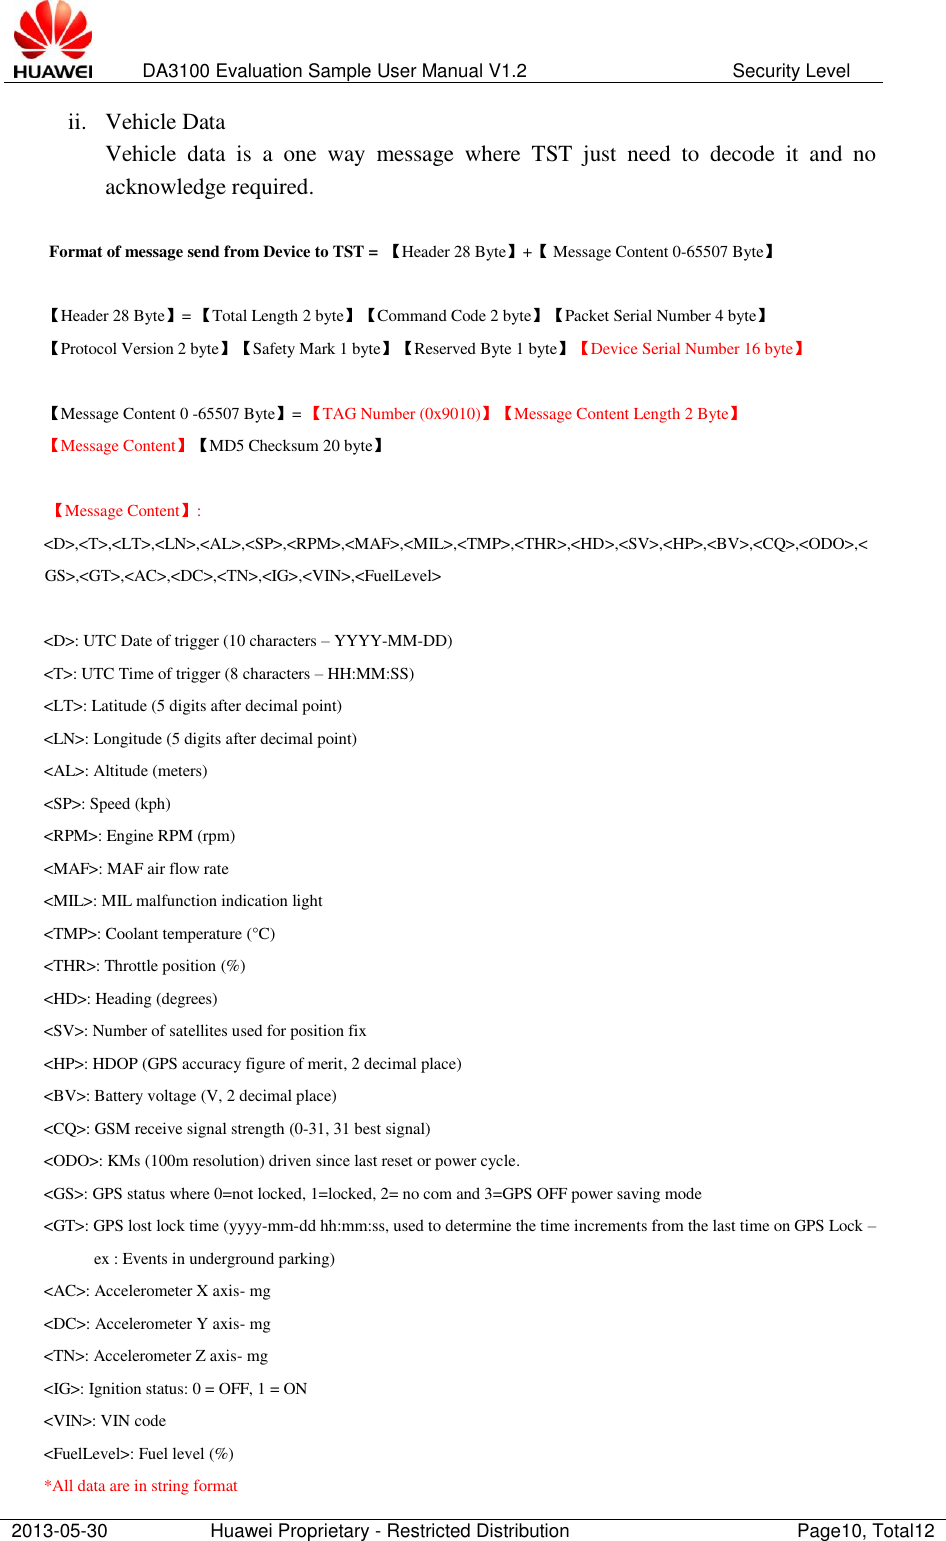   DA3100 Evaluation Sample User Manual V1.2 Security Level  2013-05-30 Huawei Proprietary - Restricted Distribution Page10, Total12  ii. Vehicle Data Vehicle  data  is  a  one  way  message  where  TST  just  need  to  decode  it  and  no acknowledge required.       Format of message send from Device to TST =  【Header 28 Byte】+【 Message Content 0-65507 Byte】  【Header 28 Byte】= 【Total Length 2 byte】【Command Code 2 byte】【Packet Serial Number 4 byte】 【Protocol Version 2 byte】【Safety Mark 1 byte】【Reserved Byte 1 byte】【Device Serial Number 16 byte】  【Message Content 0 -65507 Byte】= 【TAG Number (0x9010)】【Message Content Length 2 Byte】 【Message Content】【MD5 Checksum 20 byte】    【Message Content】: &lt;D&gt;,&lt;T&gt;,&lt;LT&gt;,&lt;LN&gt;,&lt;AL&gt;,&lt;SP&gt;,&lt;RPM&gt;,&lt;MAF&gt;,&lt;MIL&gt;,&lt;TMP&gt;,&lt;THR&gt;,&lt;HD&gt;,&lt;SV&gt;,&lt;HP&gt;,&lt;BV&gt;,&lt;CQ&gt;,&lt;ODO&gt;,&lt;GS&gt;,&lt;GT&gt;,&lt;AC&gt;,&lt;DC&gt;,&lt;TN&gt;,&lt;IG&gt;,&lt;VIN&gt;,&lt;FuelLevel&gt;    &lt;D&gt;: UTC Date of trigger (10 characters – YYYY-MM-DD) &lt;T&gt;: UTC Time of trigger (8 characters – HH:MM:SS) &lt;LT&gt;: Latitude (5 digits after decimal point) &lt;LN&gt;: Longitude (5 digits after decimal point) &lt;AL&gt;: Altitude (meters) &lt;SP&gt;: Speed (kph)  &lt;RPM&gt;: Engine RPM (rpm) &lt;MAF&gt;: MAF air flow rate &lt;MIL&gt;: MIL malfunction indication light &lt;TMP&gt;: Coolant temperature (°C) &lt;THR&gt;: Throttle position (%) &lt;HD&gt;: Heading (degrees) &lt;SV&gt;: Number of satellites used for position fix &lt;HP&gt;: HDOP (GPS accuracy figure of merit, 2 decimal place) &lt;BV&gt;: Battery voltage (V, 2 decimal place) &lt;CQ&gt;: GSM receive signal strength (0-31, 31 best signal) &lt;ODO&gt;: KMs (100m resolution) driven since last reset or power cycle.   &lt;GS&gt;: GPS status where 0=not locked, 1=locked, 2= no com and 3=GPS OFF power saving mode &lt;GT&gt;: GPS lost lock time (yyyy-mm-dd hh:mm:ss, used to determine the time increments from the last time on GPS Lock – ex : Events in underground parking) &lt;AC&gt;: Accelerometer X axis- mg &lt;DC&gt;: Accelerometer Y axis- mg &lt;TN&gt;: Accelerometer Z axis- mg &lt;IG&gt;: Ignition status: 0 = OFF, 1 = ON &lt;VIN&gt;: VIN code &lt;FuelLevel&gt;: Fuel level (%) *All data are in string format 